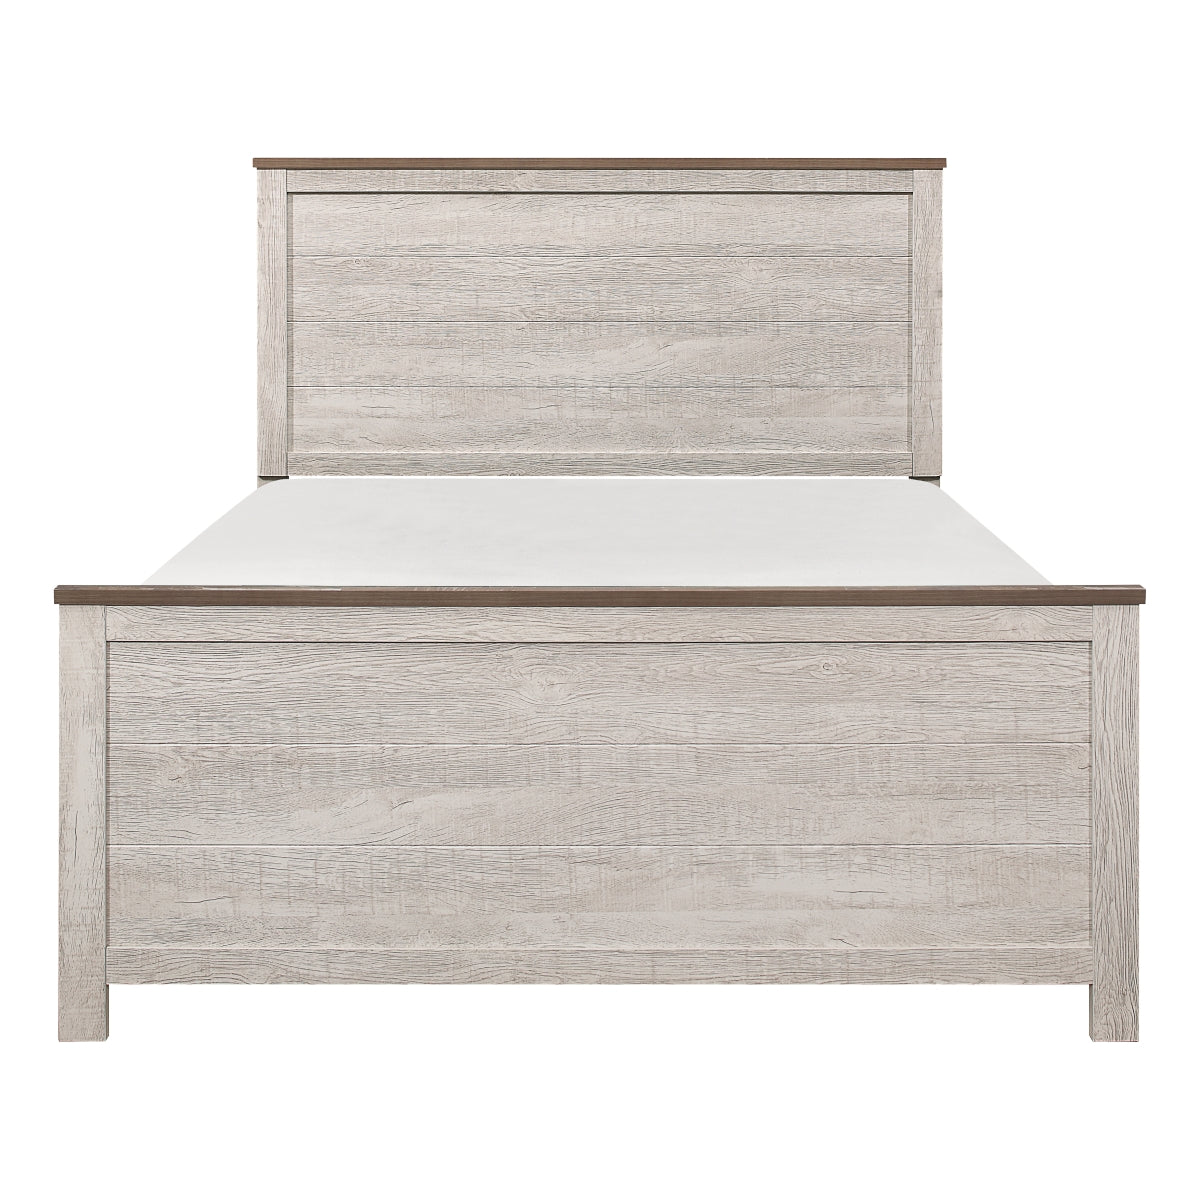 Nashville Antique White And Brown Premium Melamine Board, Engineered Wood Youth Full Panel Bed